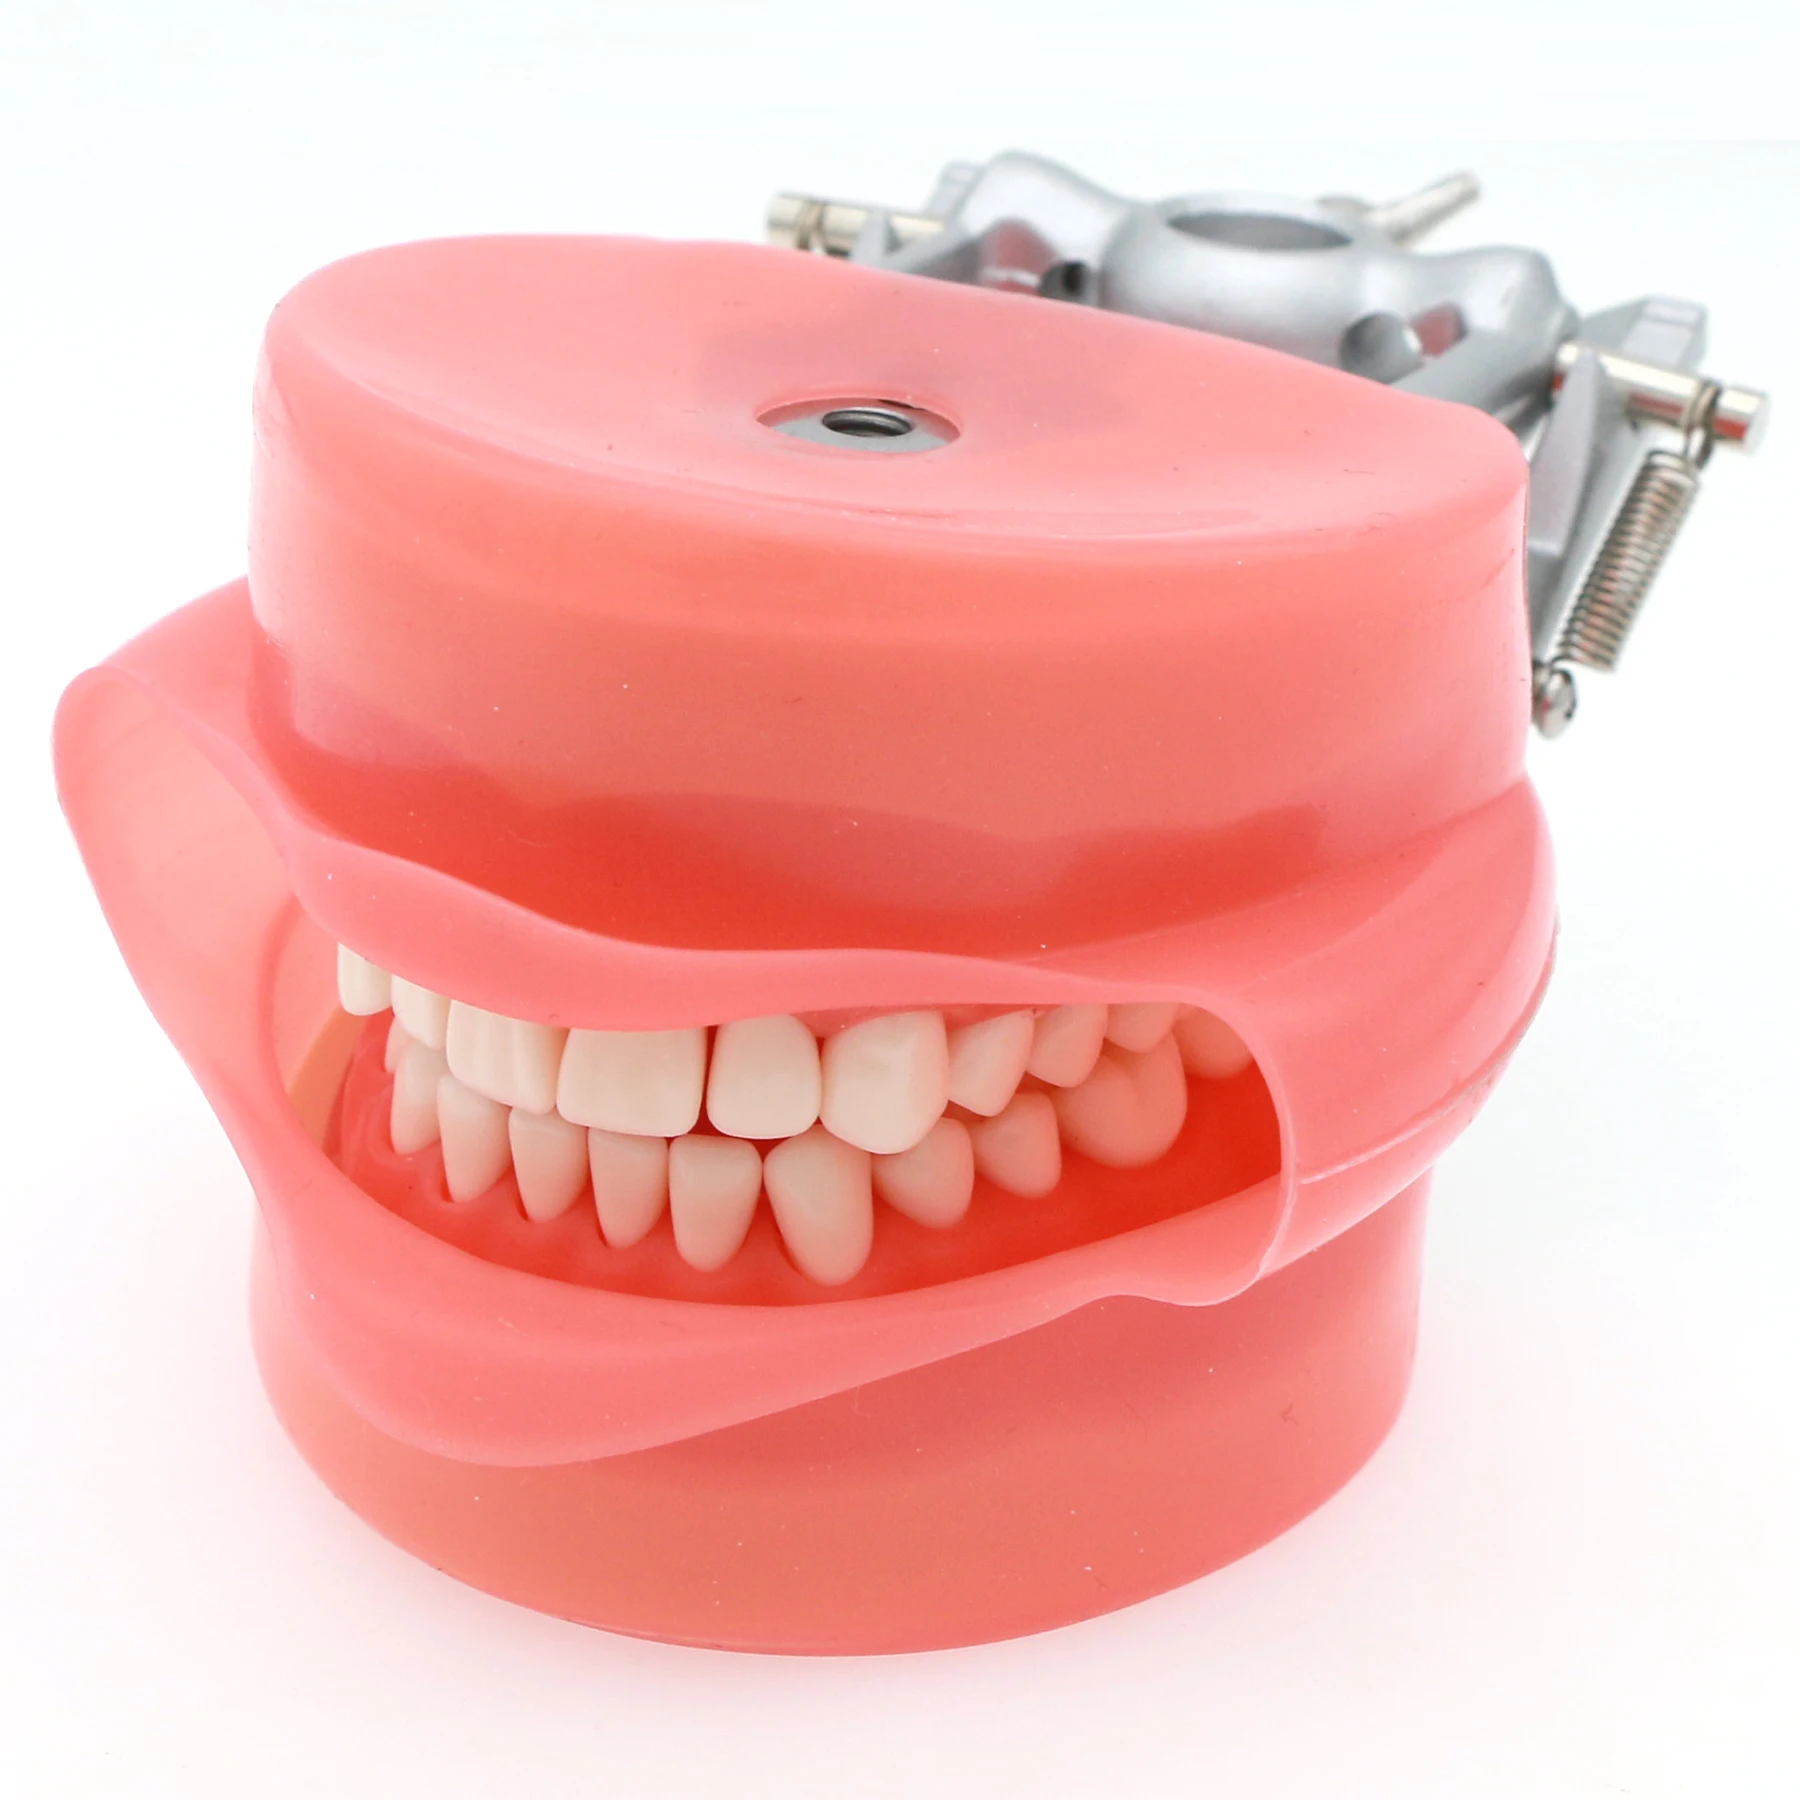 Dental Typodont Model  Compatible With Kilgore Nissin 32 Removable Teeth and Simulation Cheek for Teaching Study